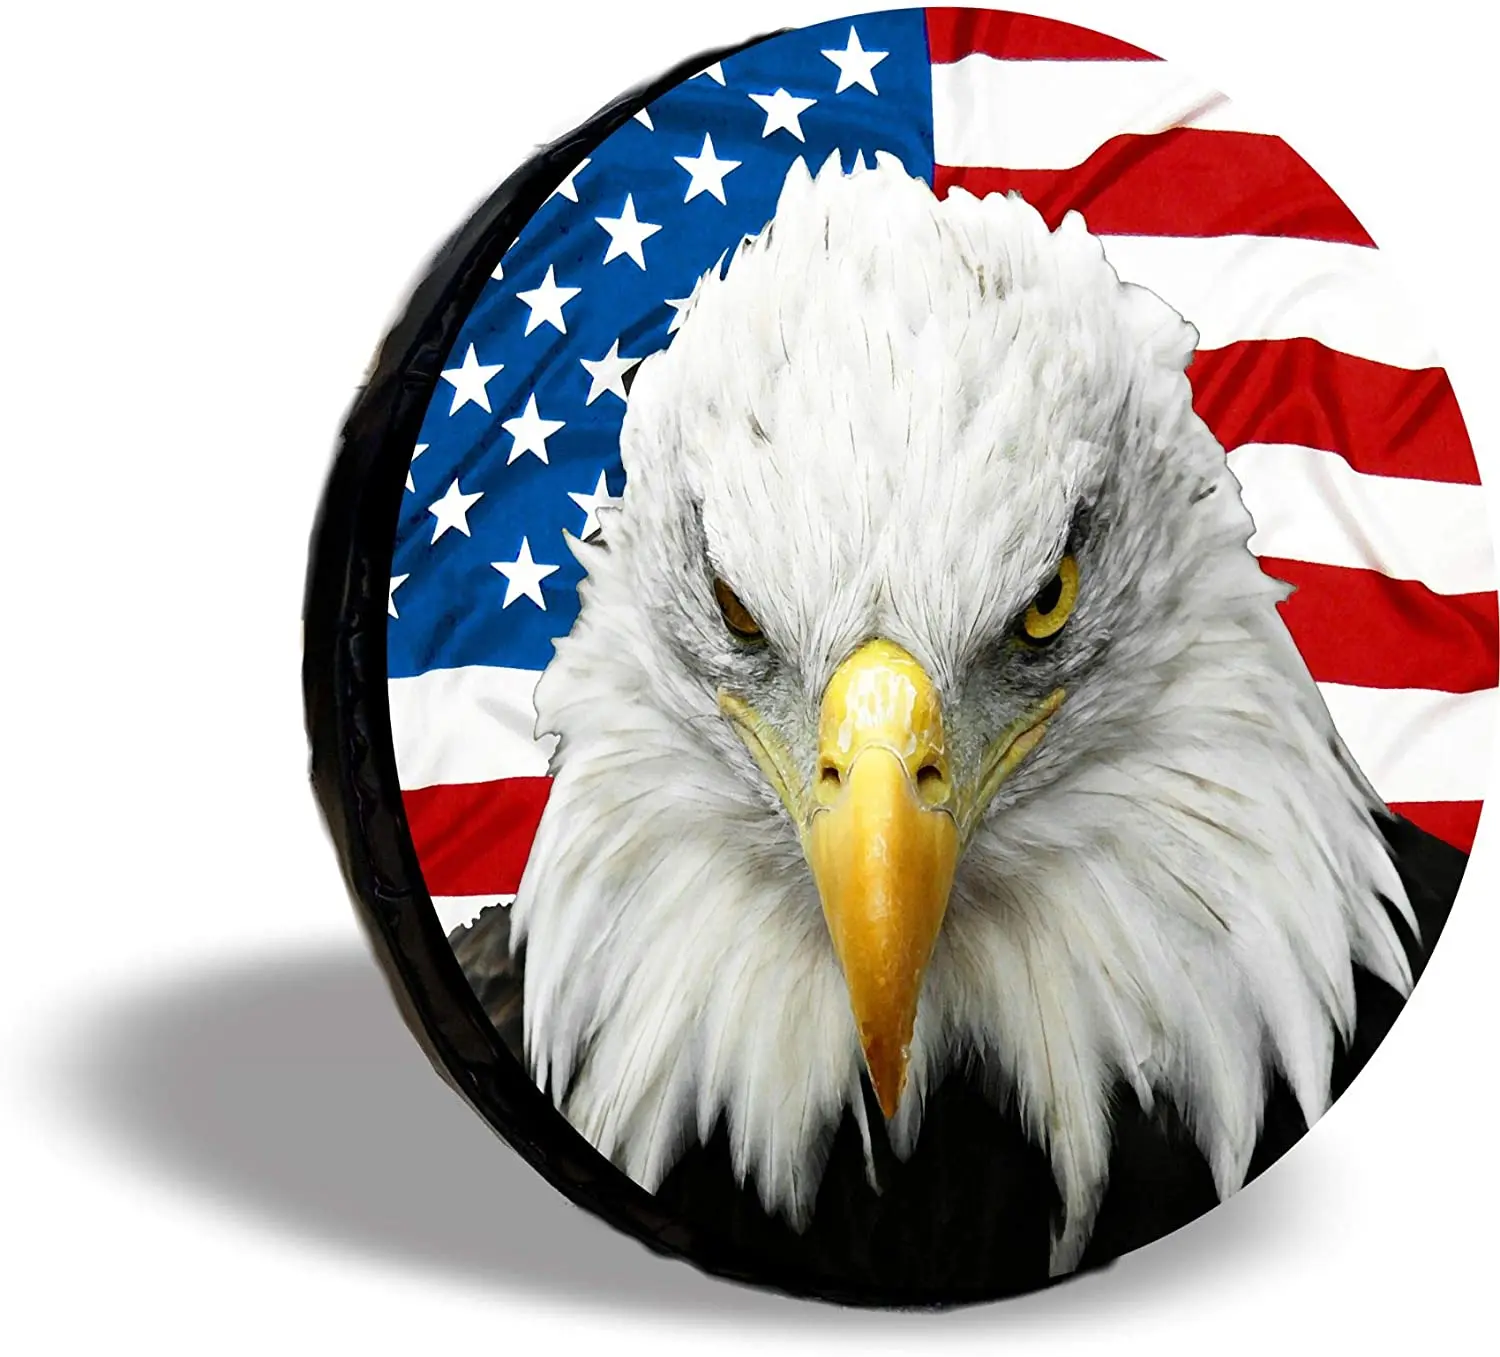 

TIRE COVER CENTRAL US American Flag Designs Eagle Horse Peace Spare Tire Cover ( Custom Sized to Any Make/Model 255/70r18